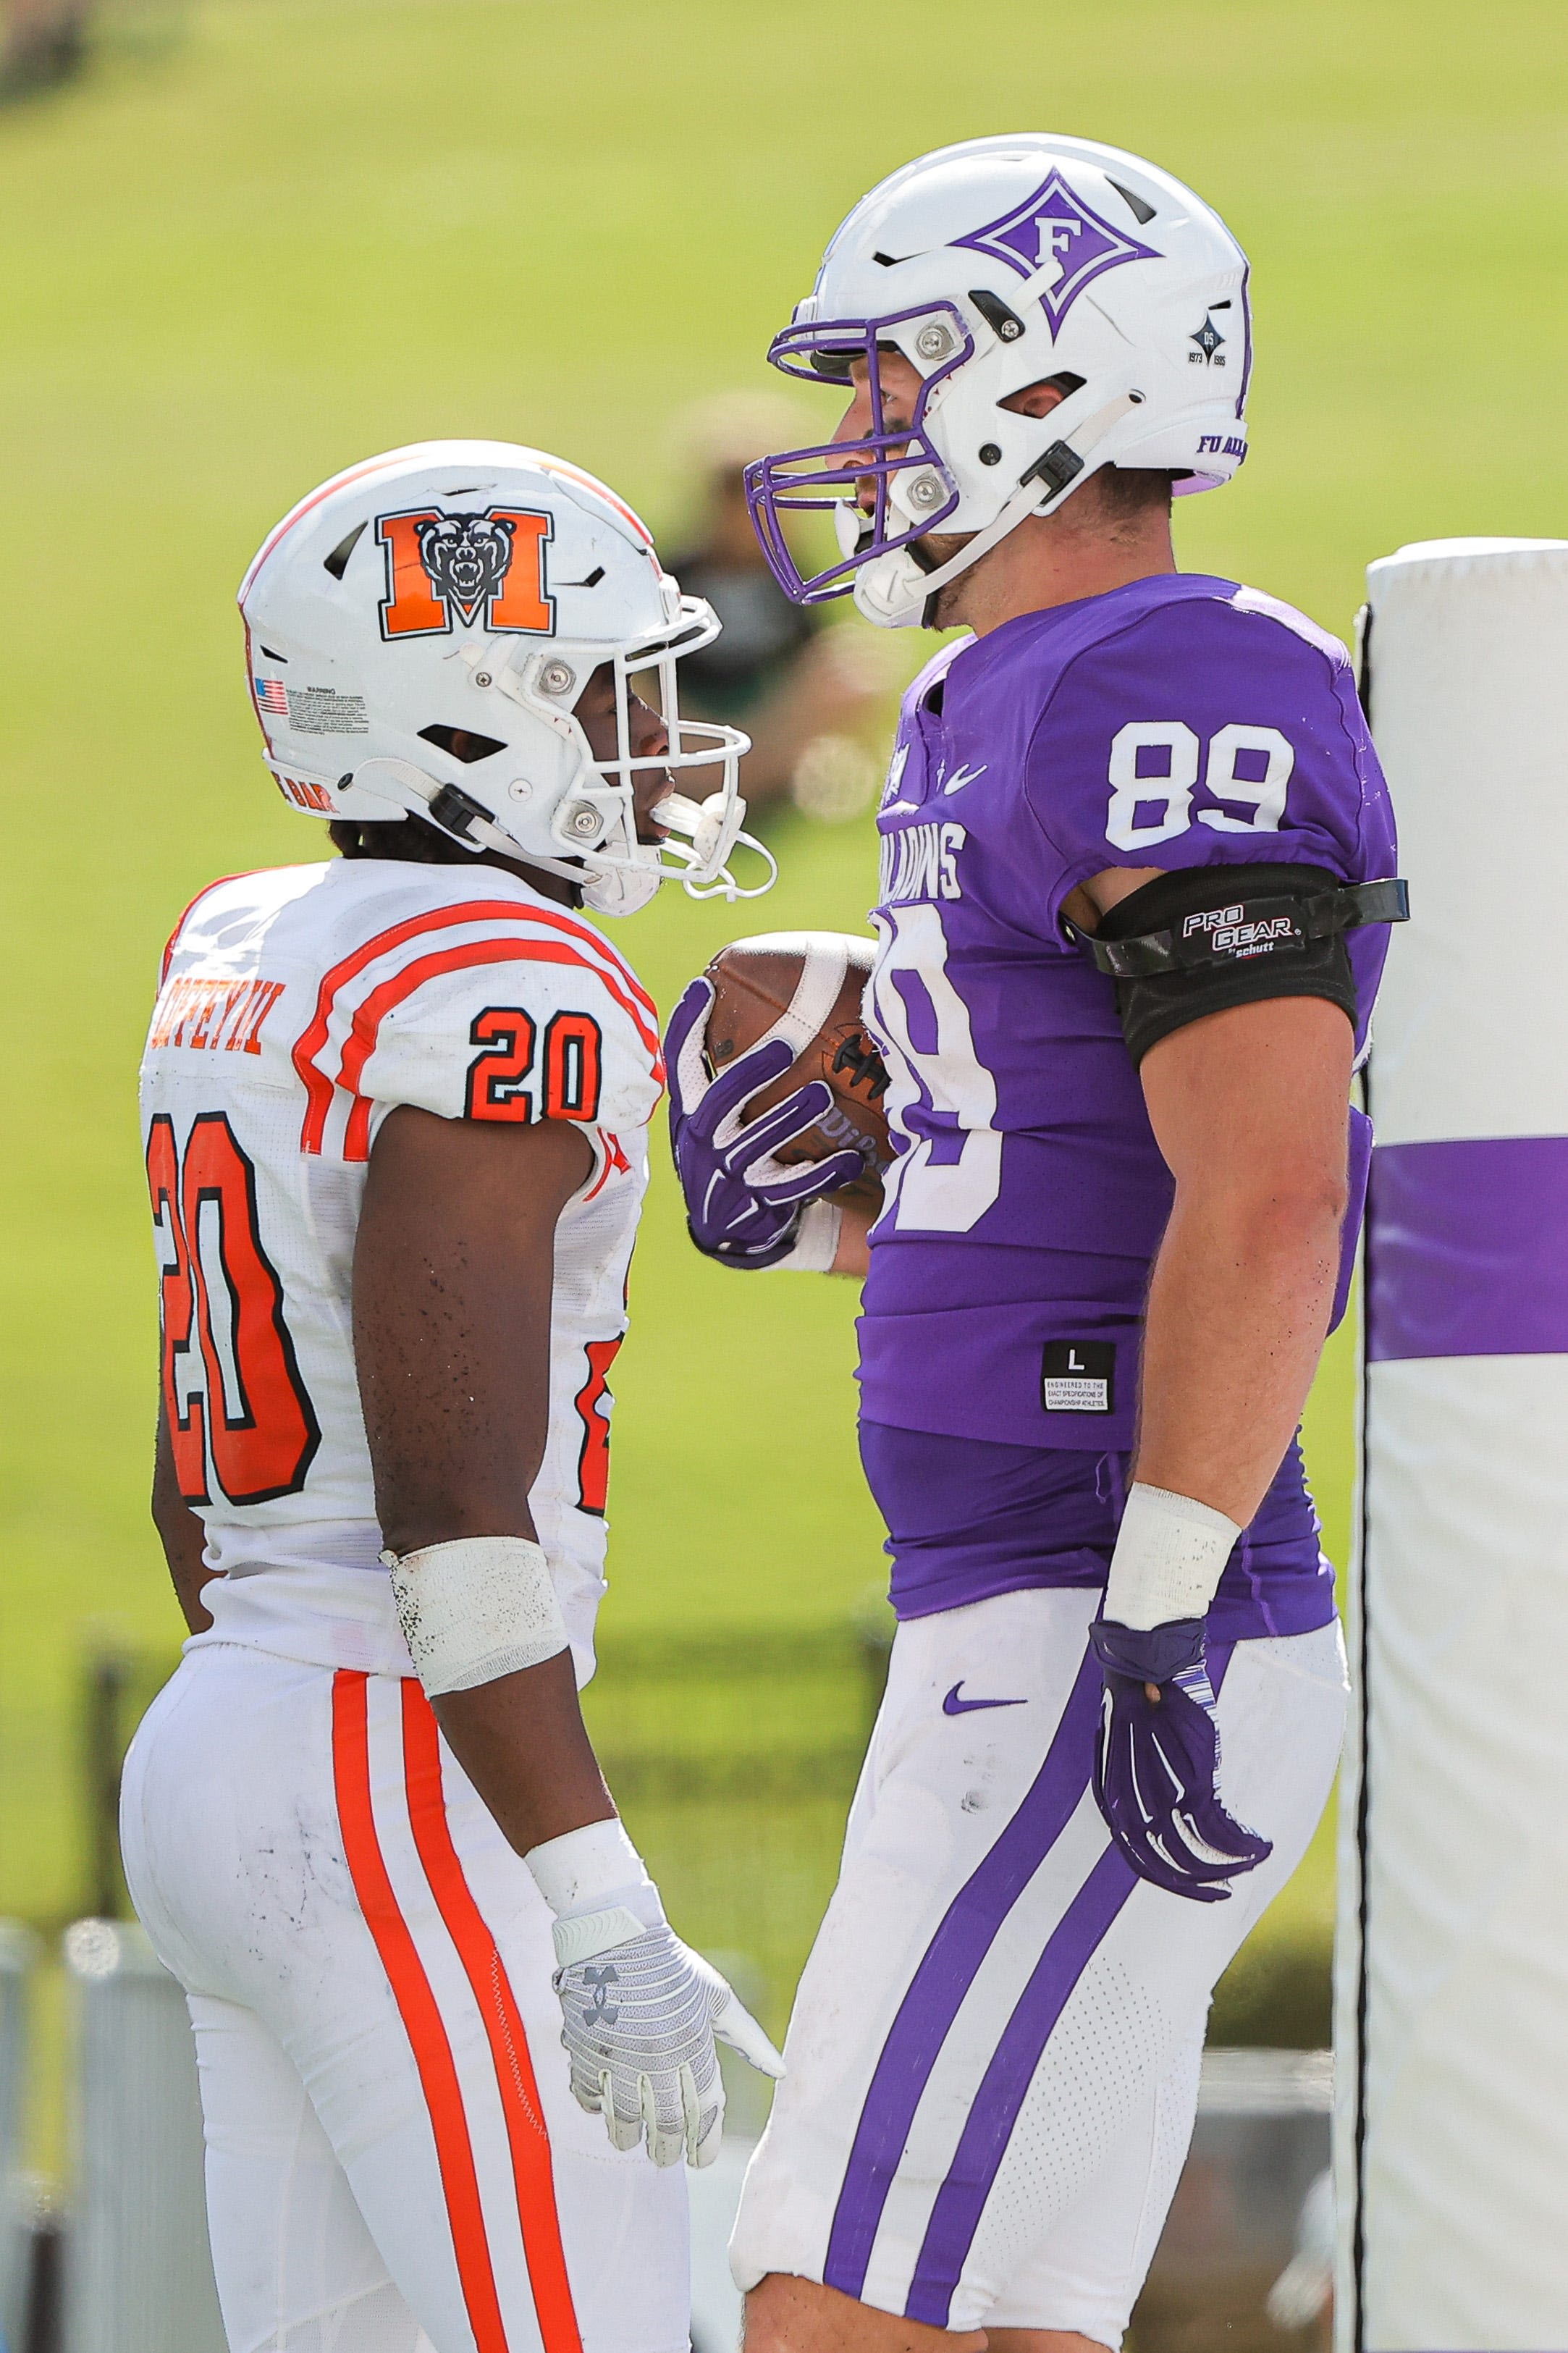 George Kittle makes quick impact by reaching out to new 49ers teammate Mason Pline of Furman